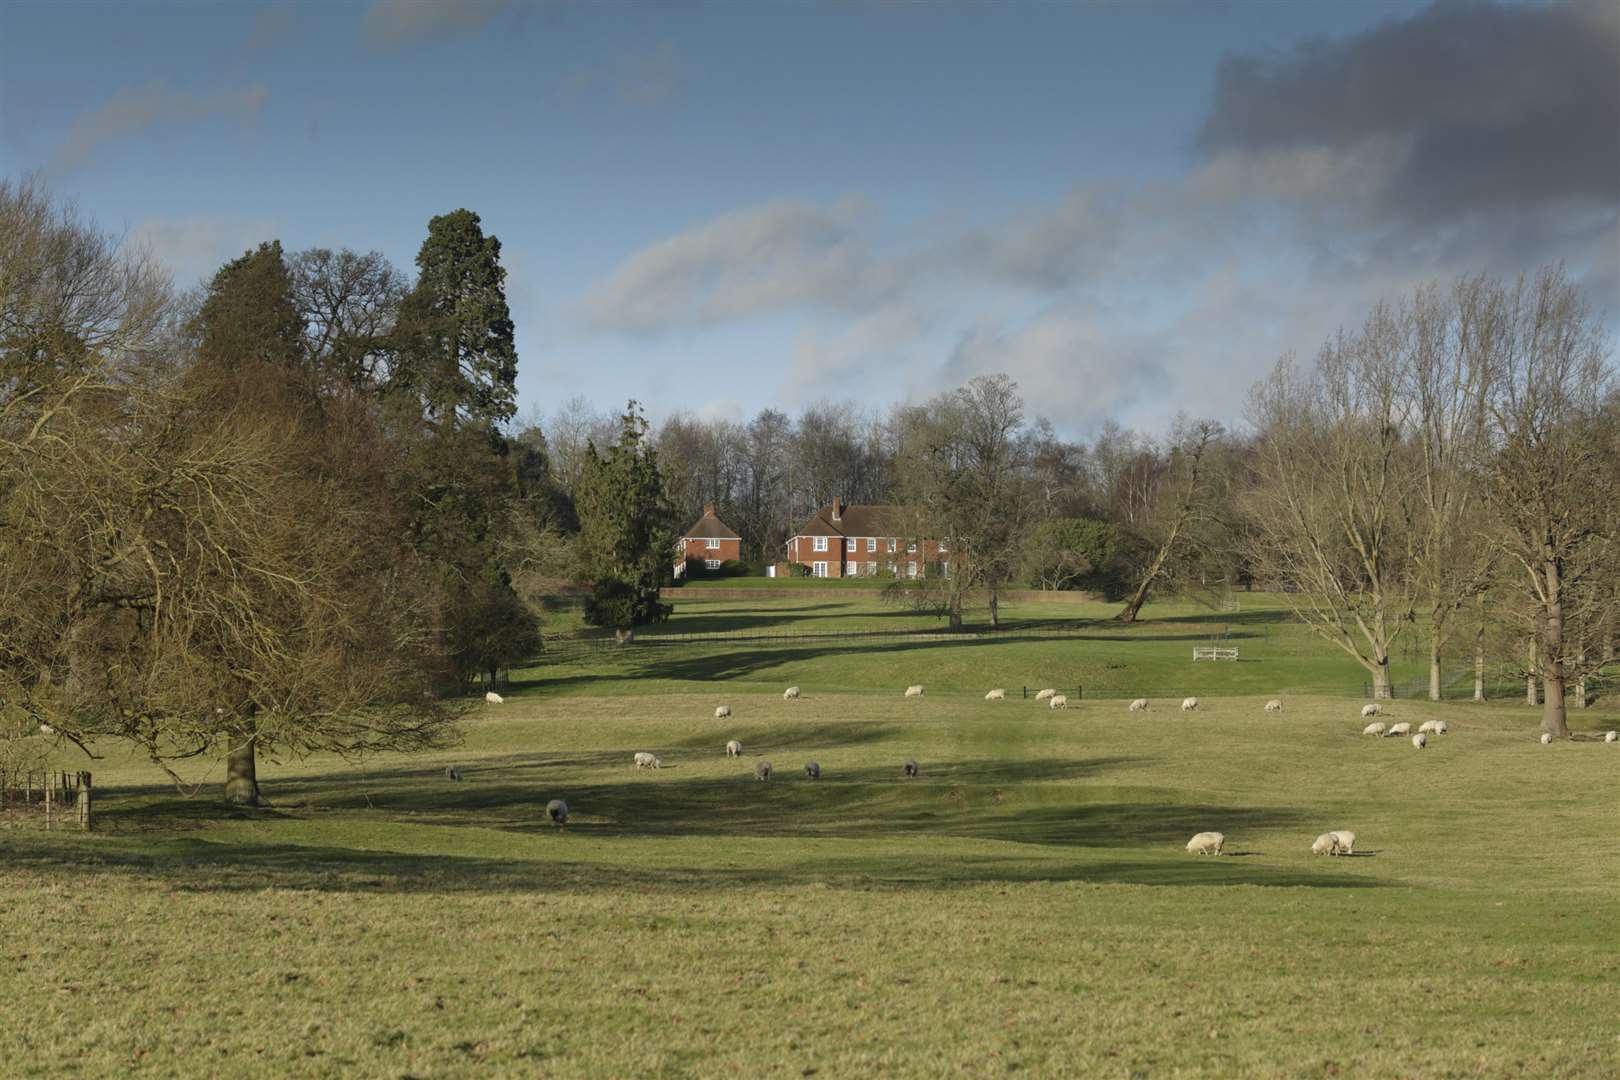 The lavish property comes with 327 acres of pasture, arable and woodland complete with lakes and country walks